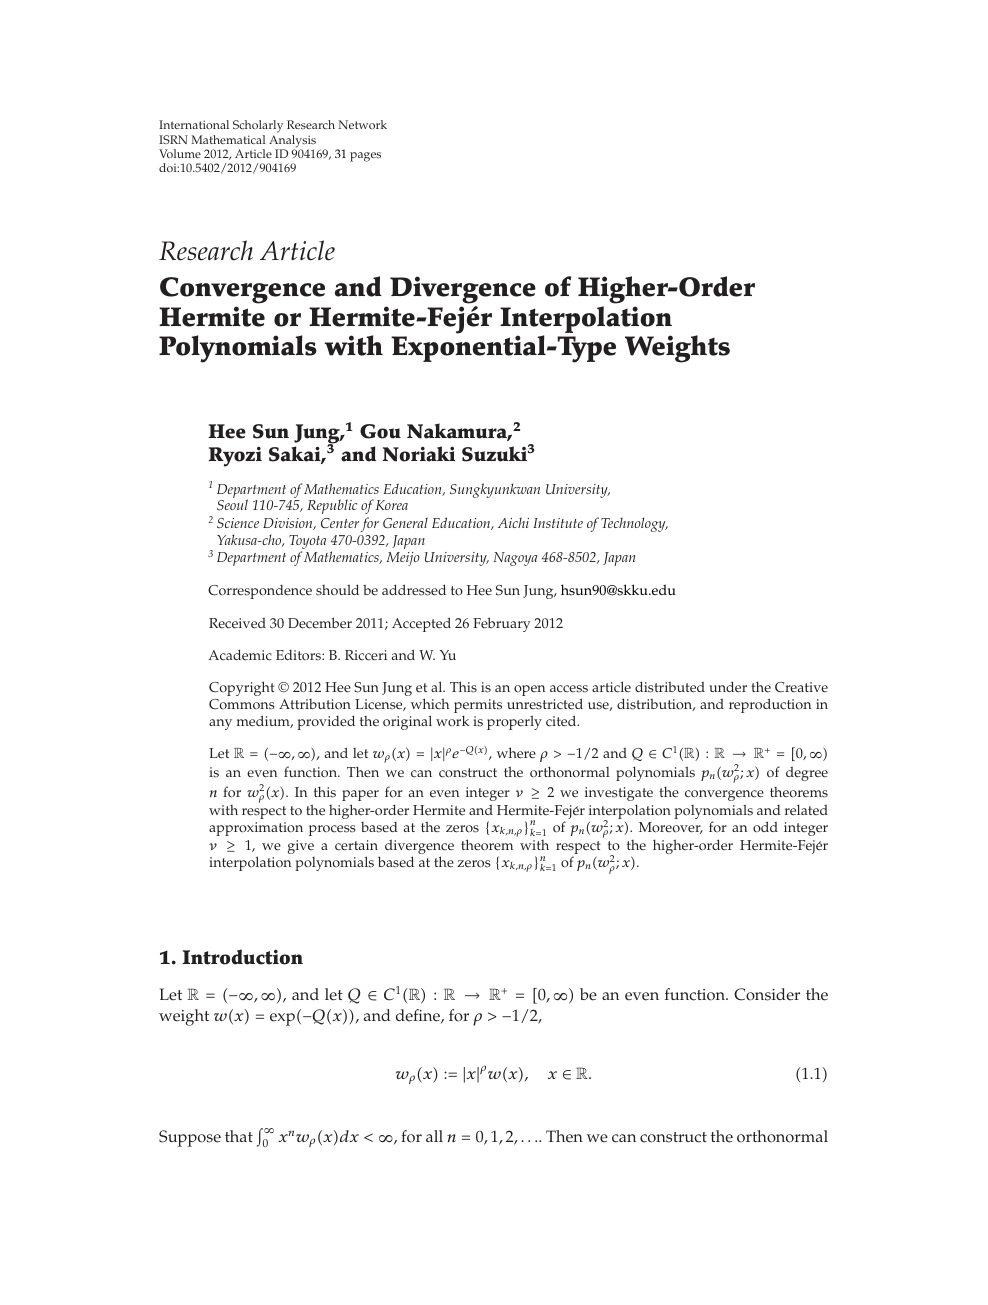 Convergence And Divergence Of Higher Order Hermite Or Hermite Fejer Interpolation Polynomials With Exponential Type Weights Topic Of Research Paper In Mathematics Download Scholarly Article Pdf And Read For Free On Cyberleninka Open Science